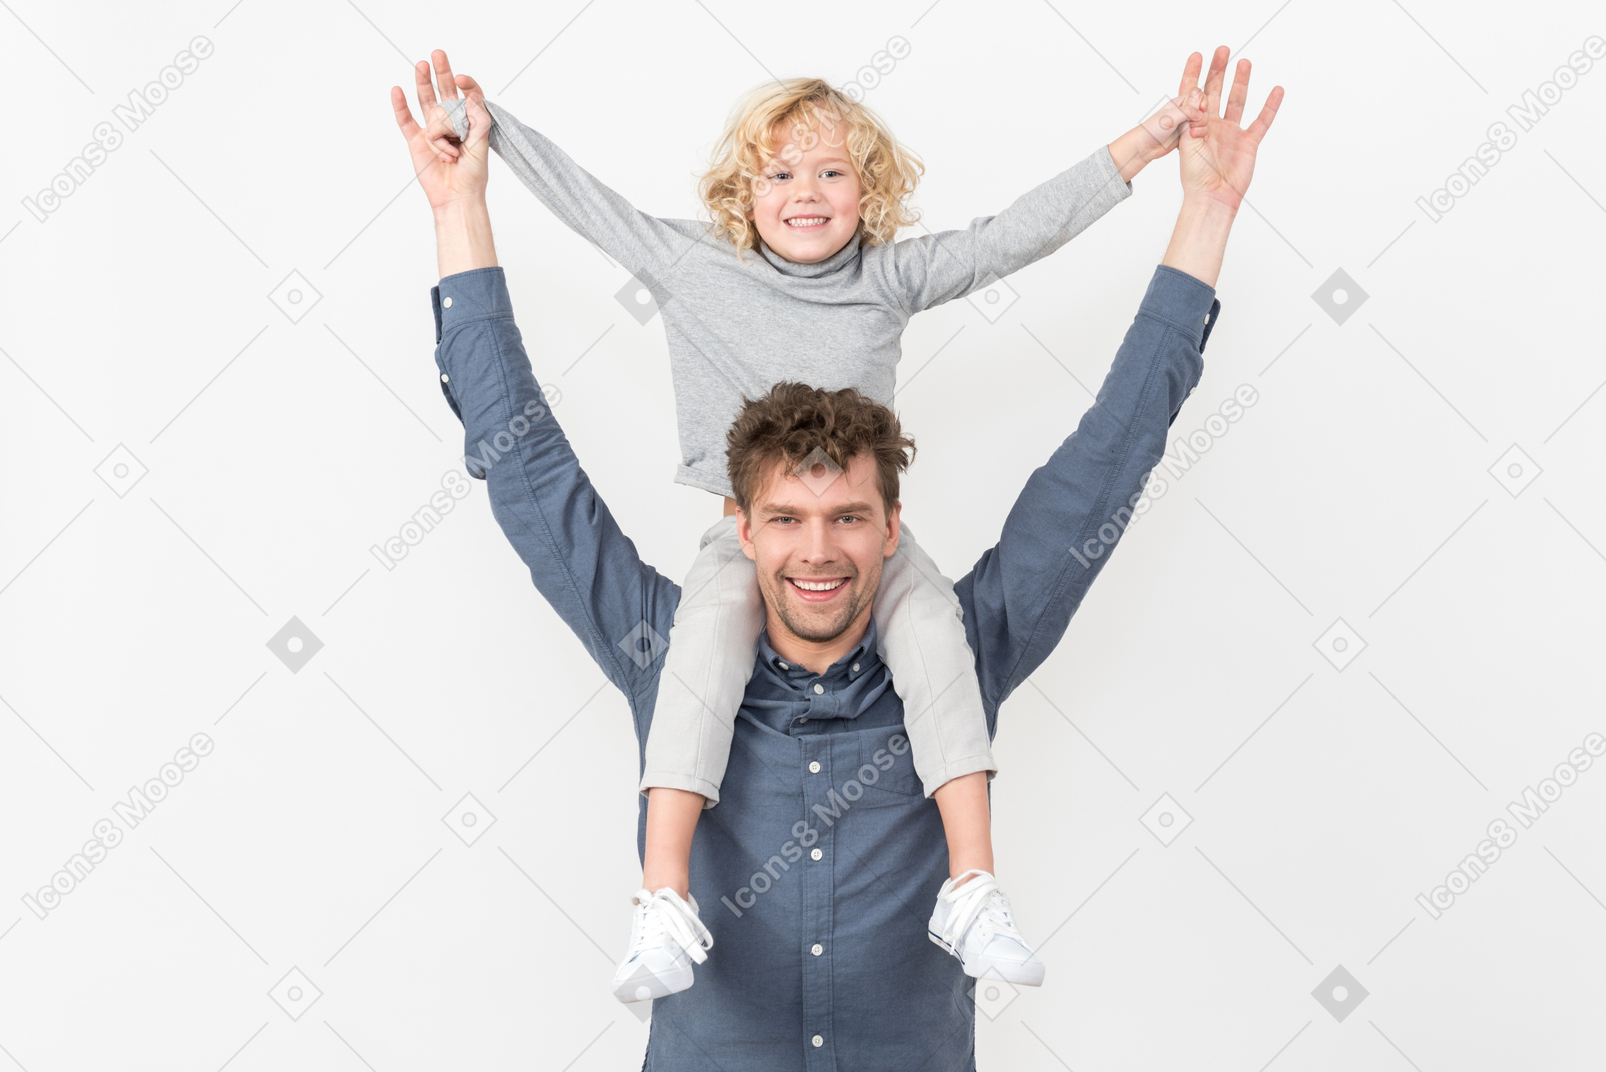 Boy sitting on his father's neck with their hands up